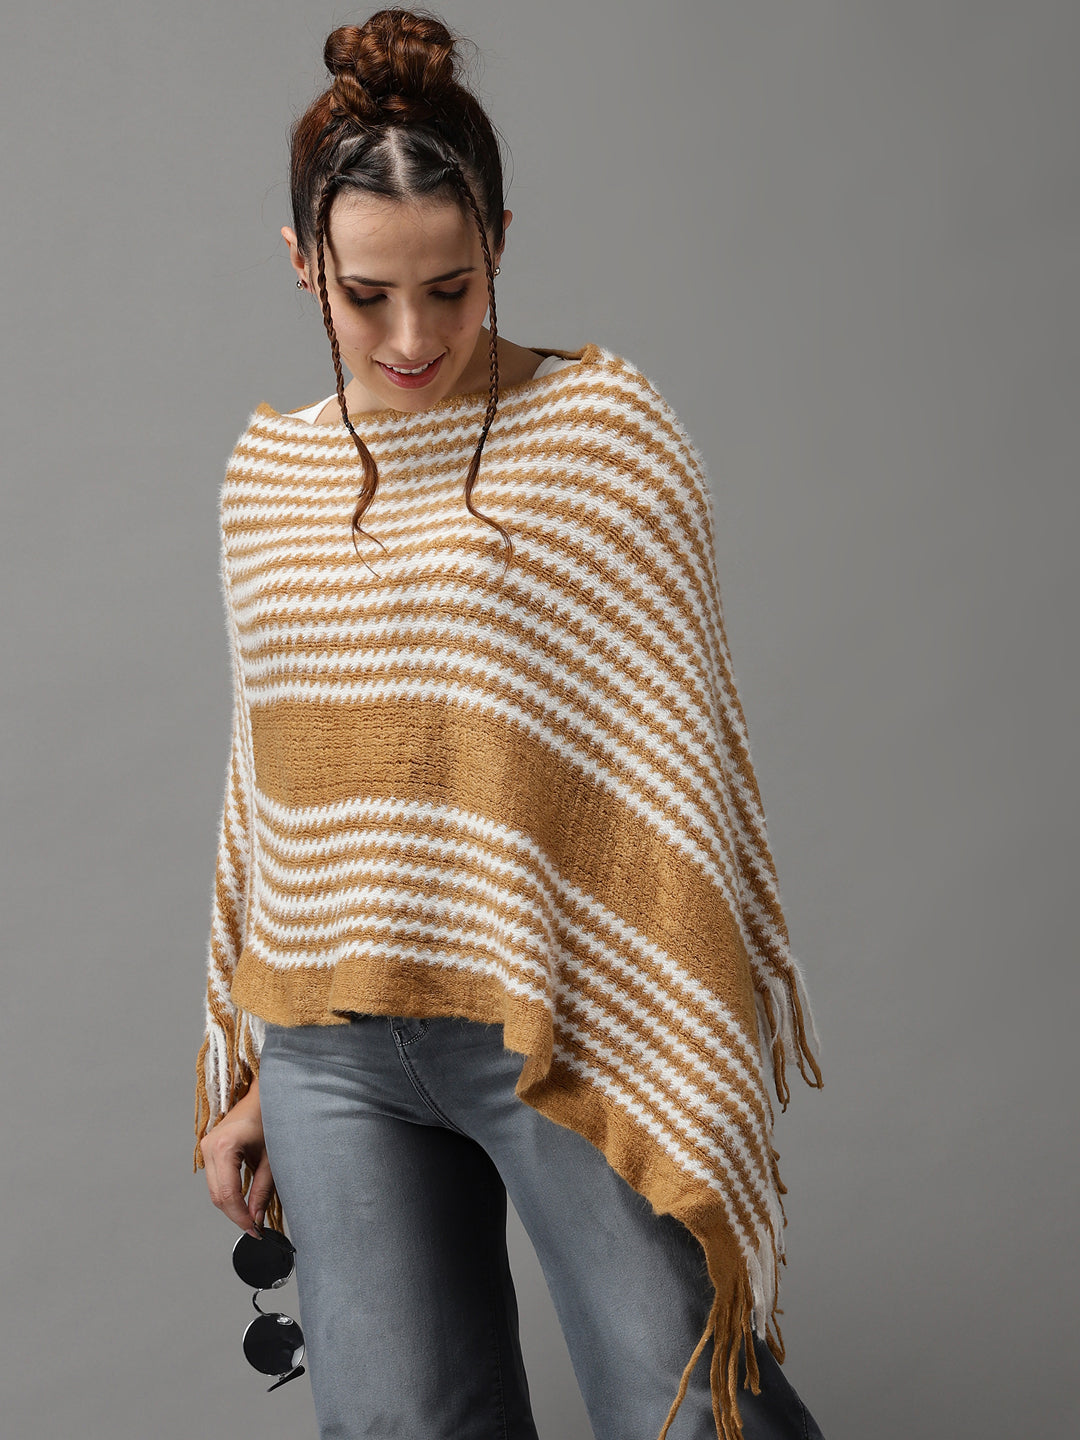 Women's Camel Brown Striped Poncho Sweater